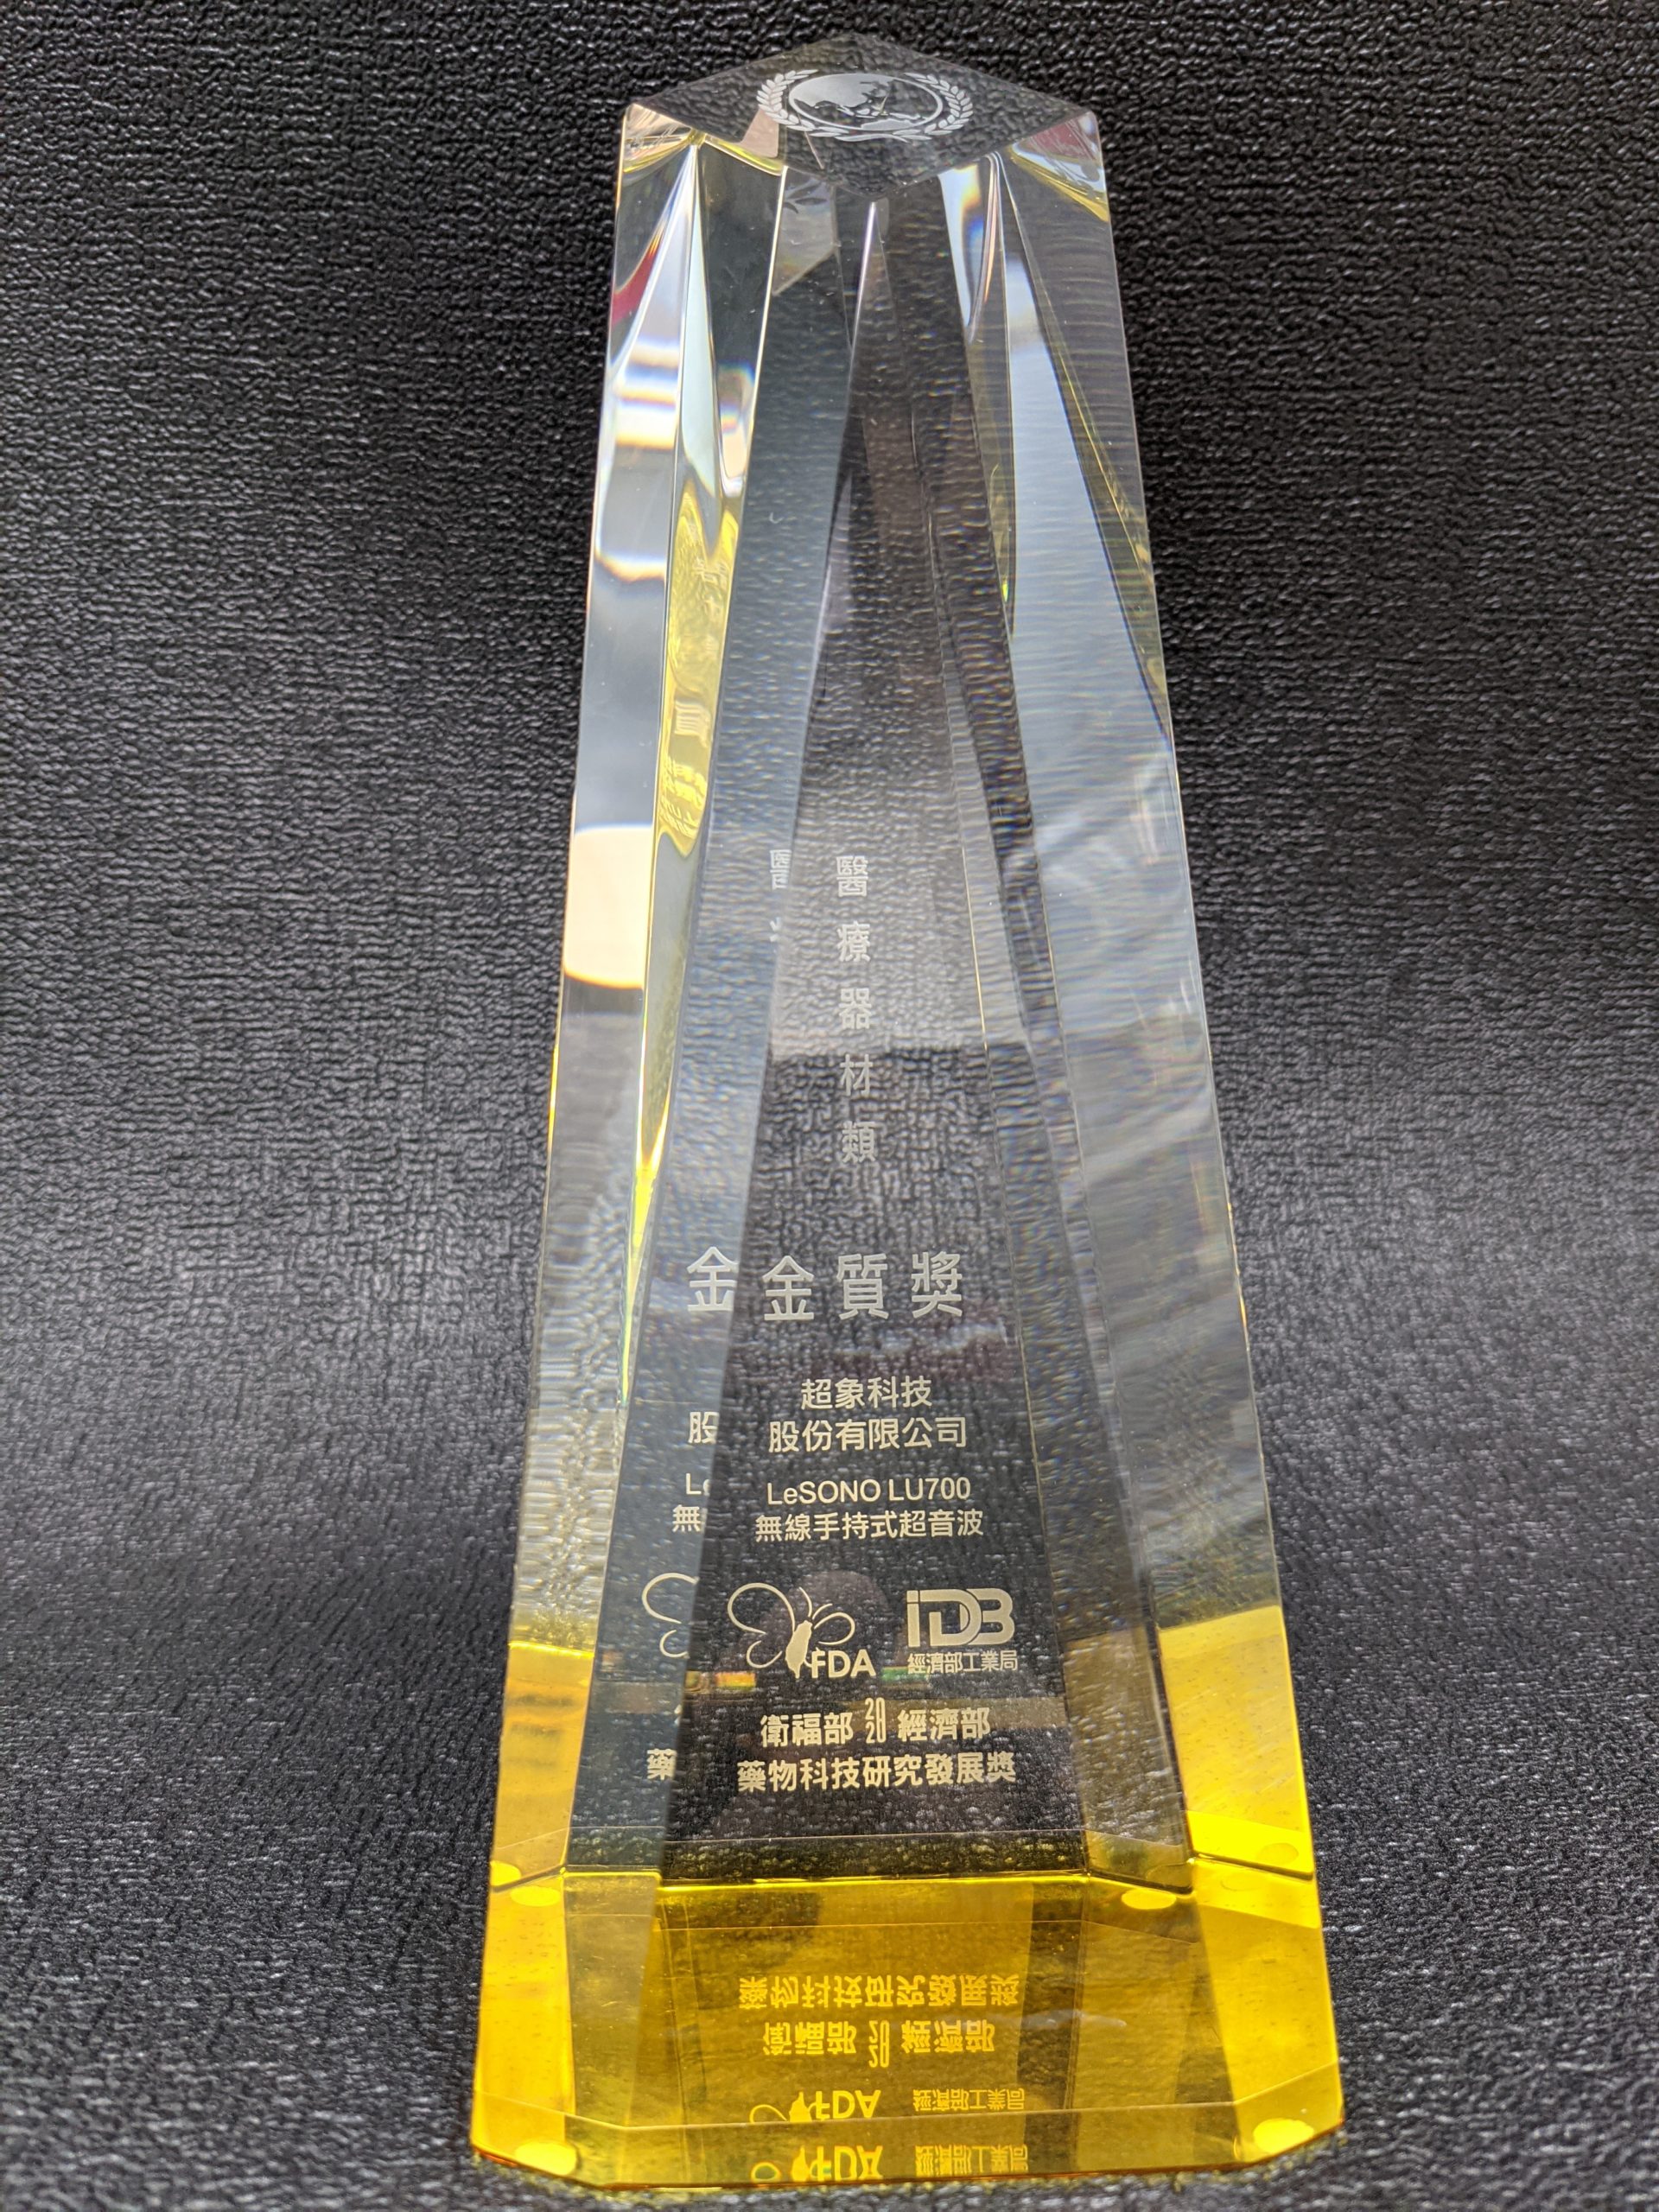 “The Gold Award” of 2020 “Pharmaceutical Technology & Research Development Award”